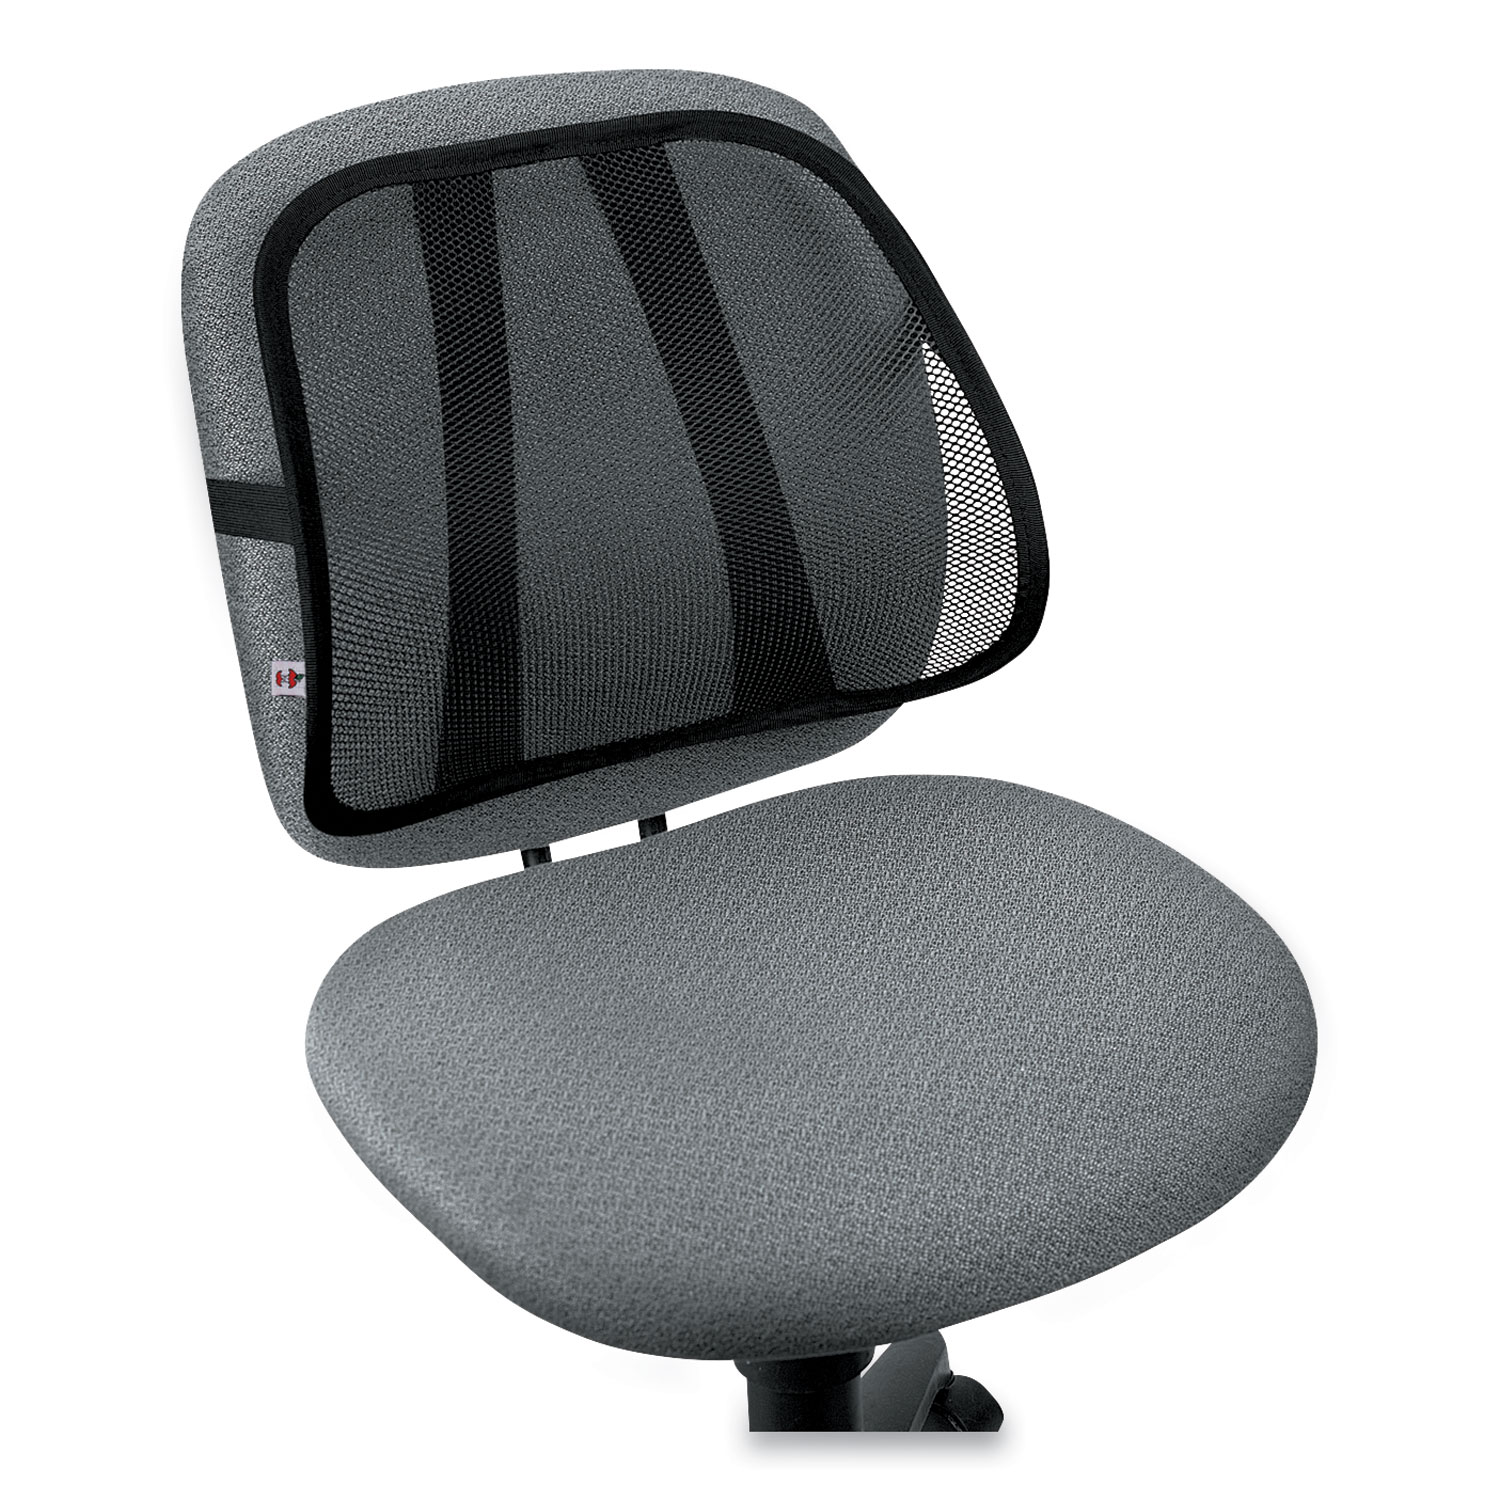 Core Products® Sitback Rest Mesh Nylon Lumbar Support Cushion, Black